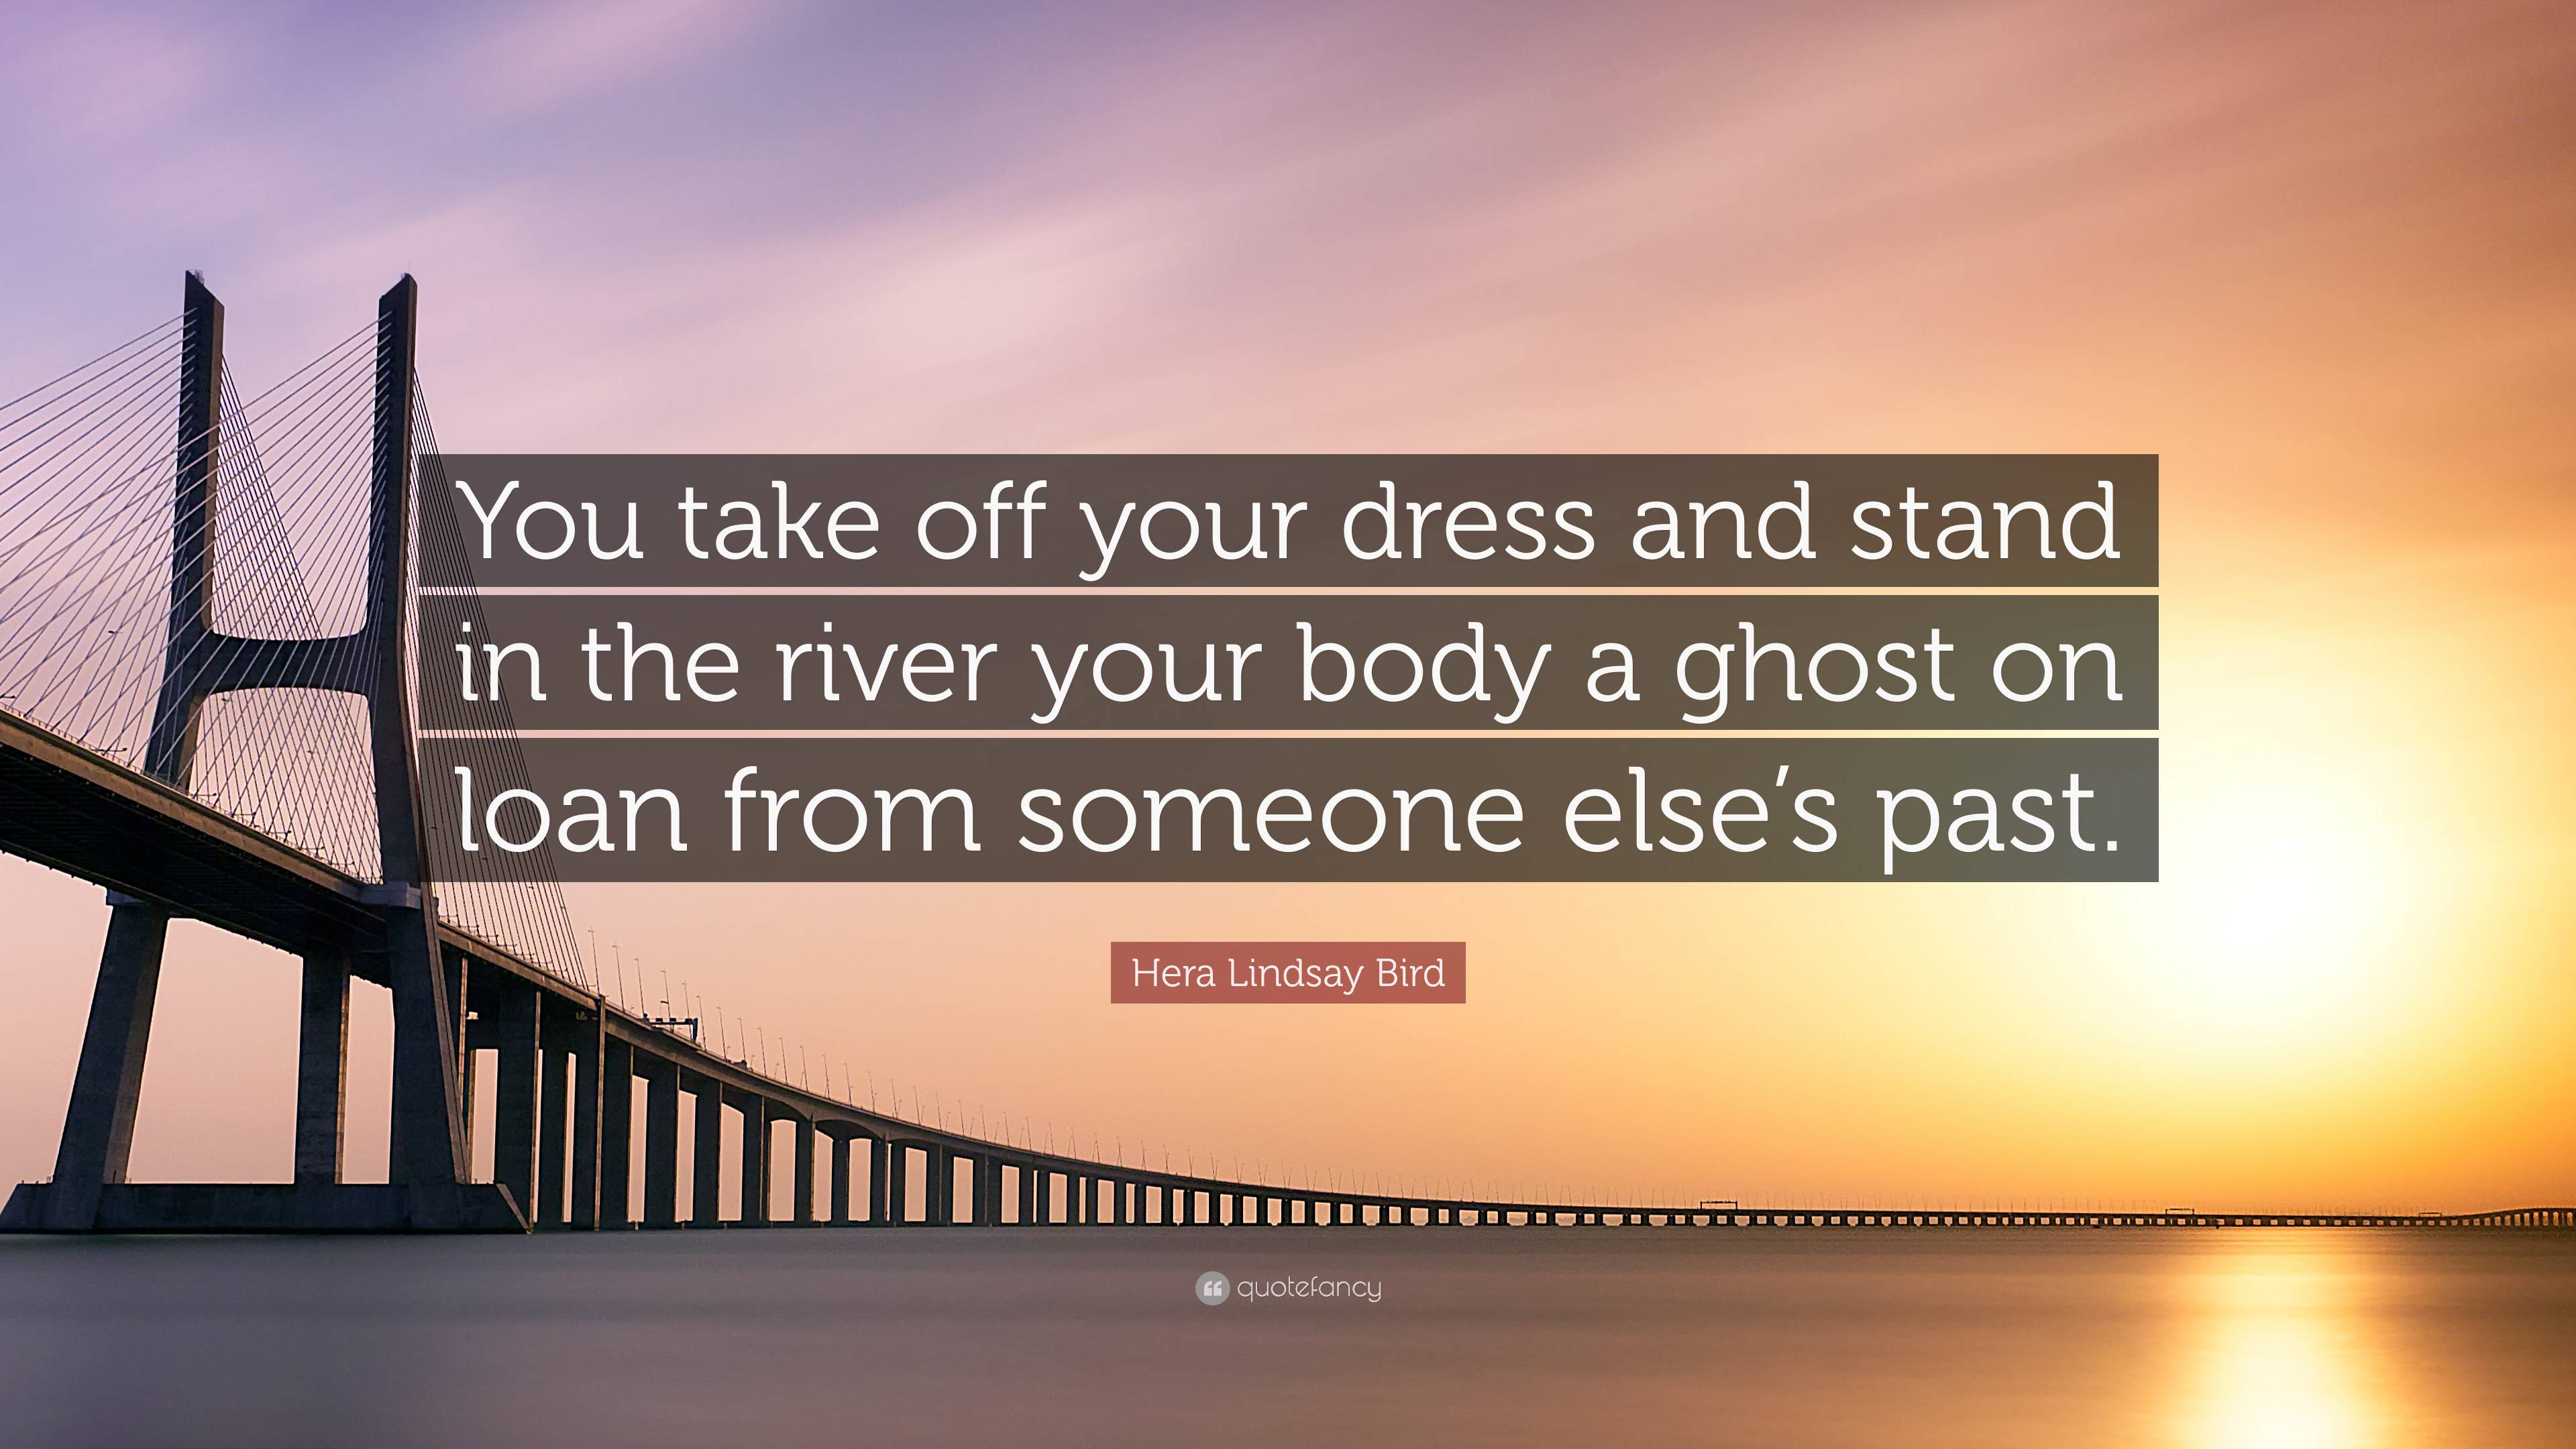 https://quotefancy.com/media/wallpaper/3840x2160/7169486-Hera-Lindsay-Bird-Quote-You-take-off-your-dress-and-stand-in-the.jpg